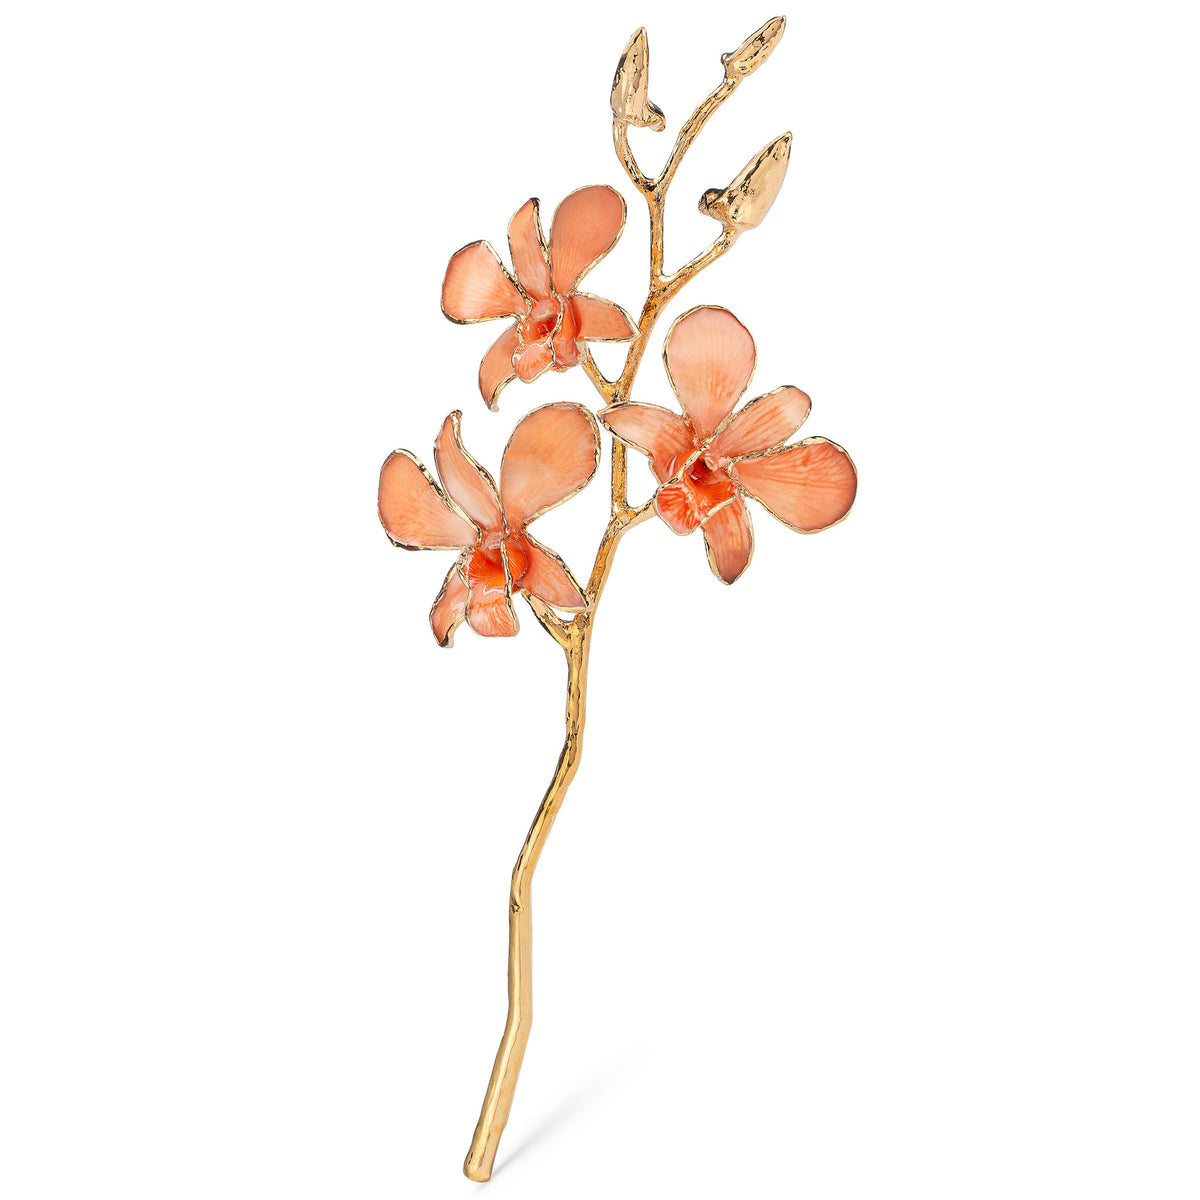 24K Gold Dipped Orchid in Peach view of gold stem and flowers